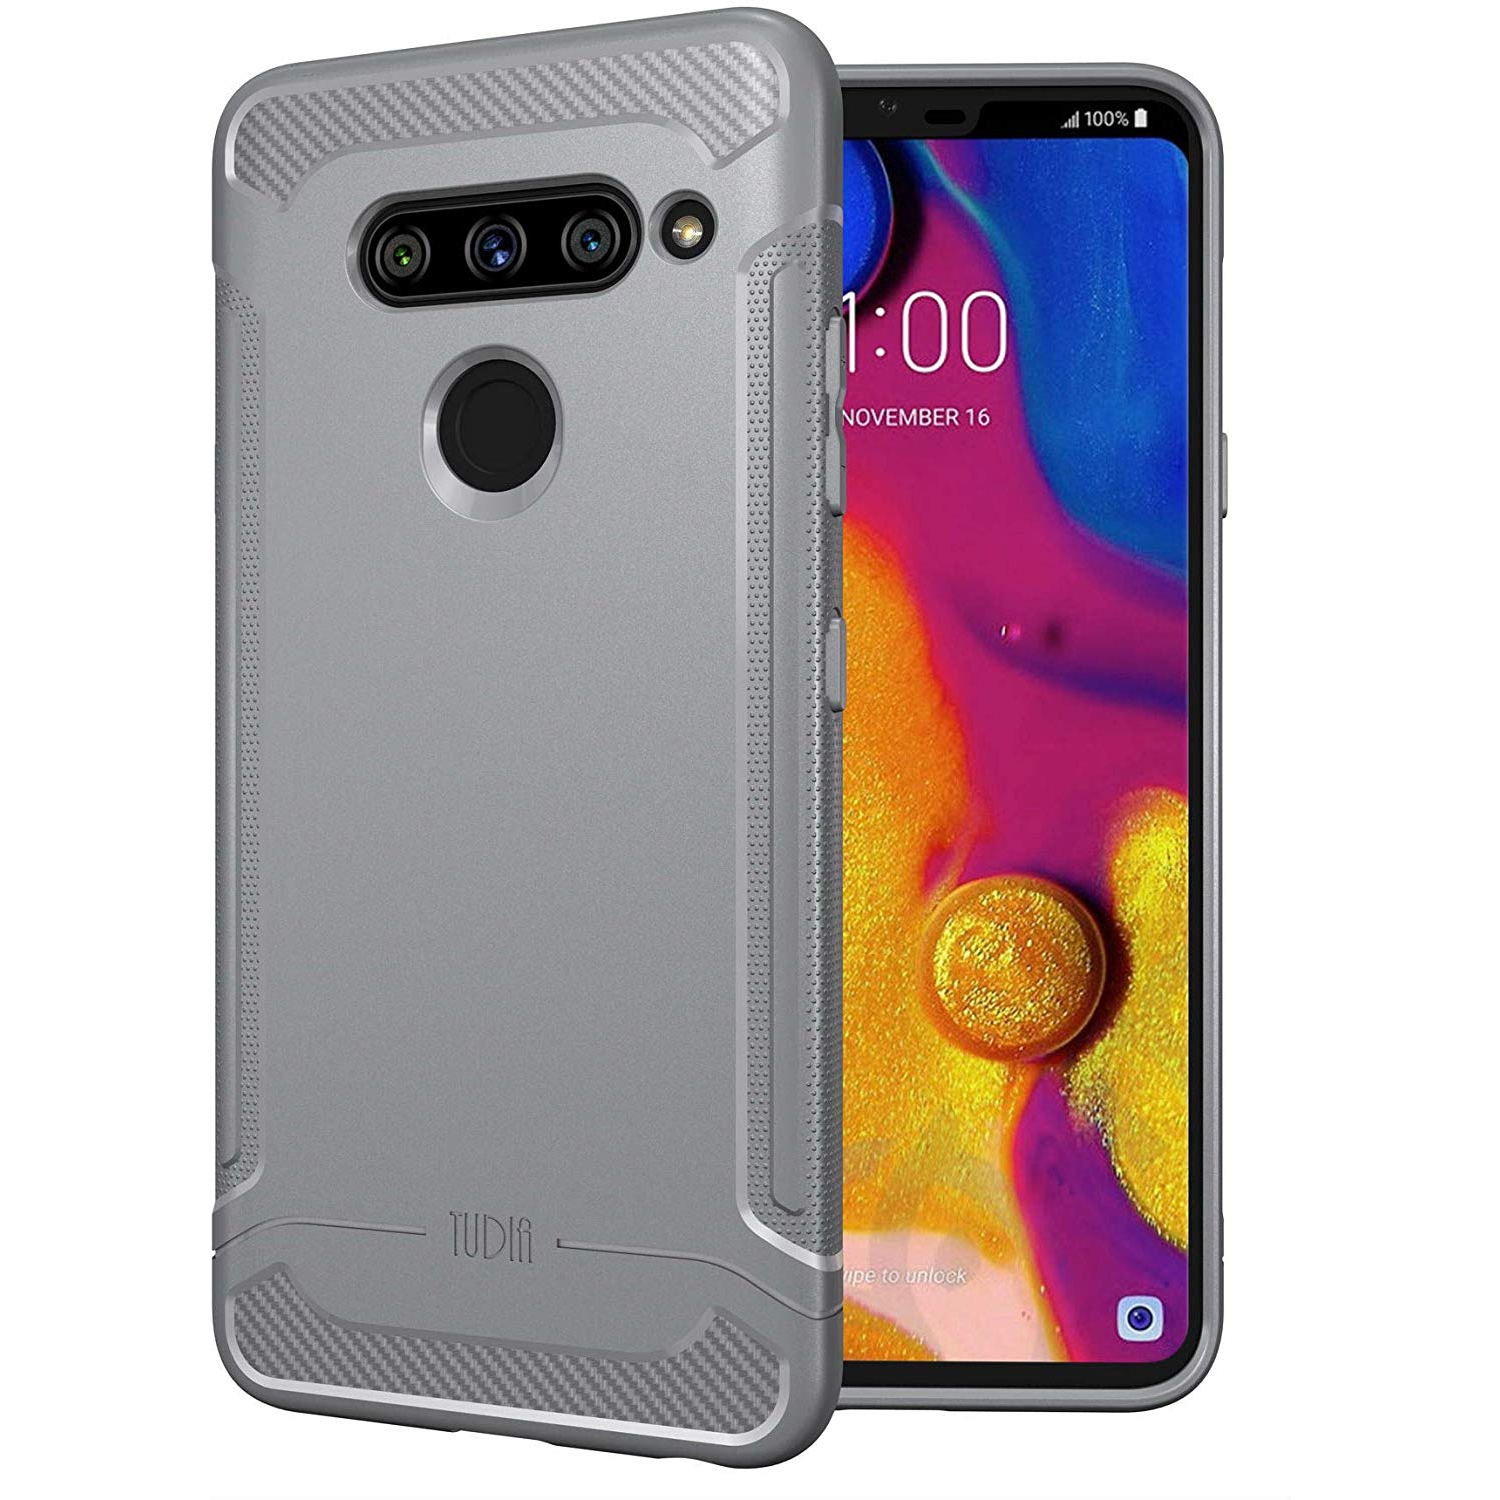 TUDIA Ultra Slim Lightweight [Linn] TPU Bumper Shock Absorption with Clicky Buttons Cover LG V40 ThinQ (Gray)